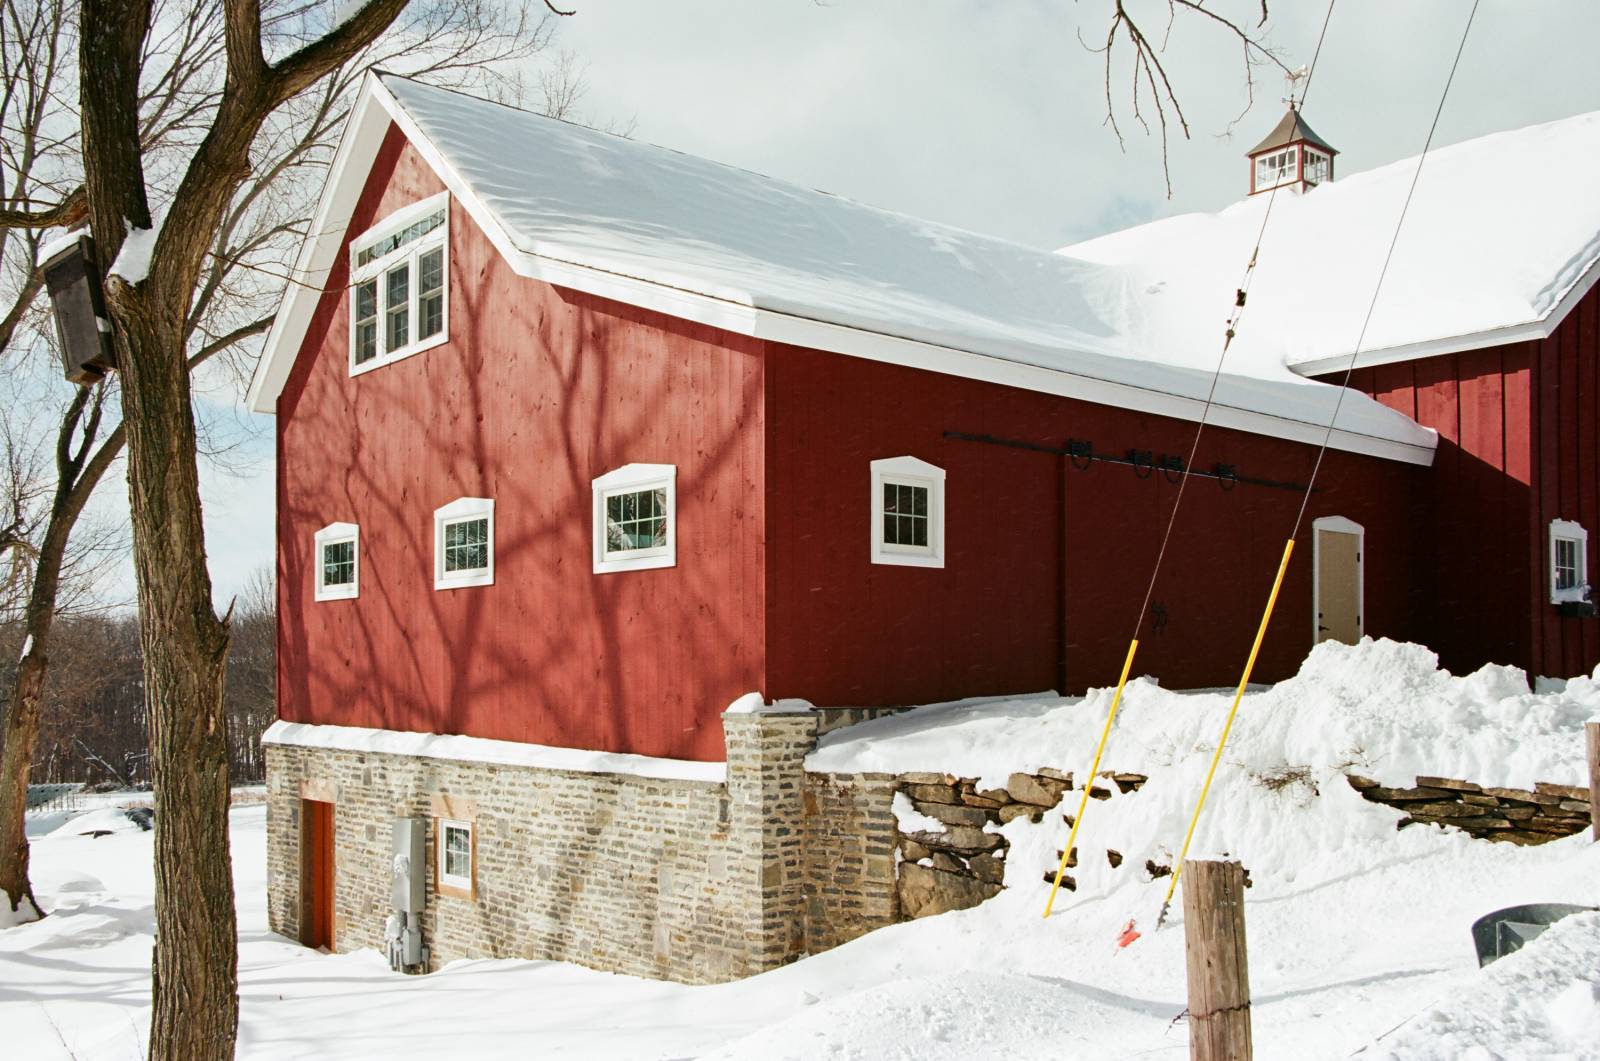 Post & beam barn built into a hill with stone veneer on foundation